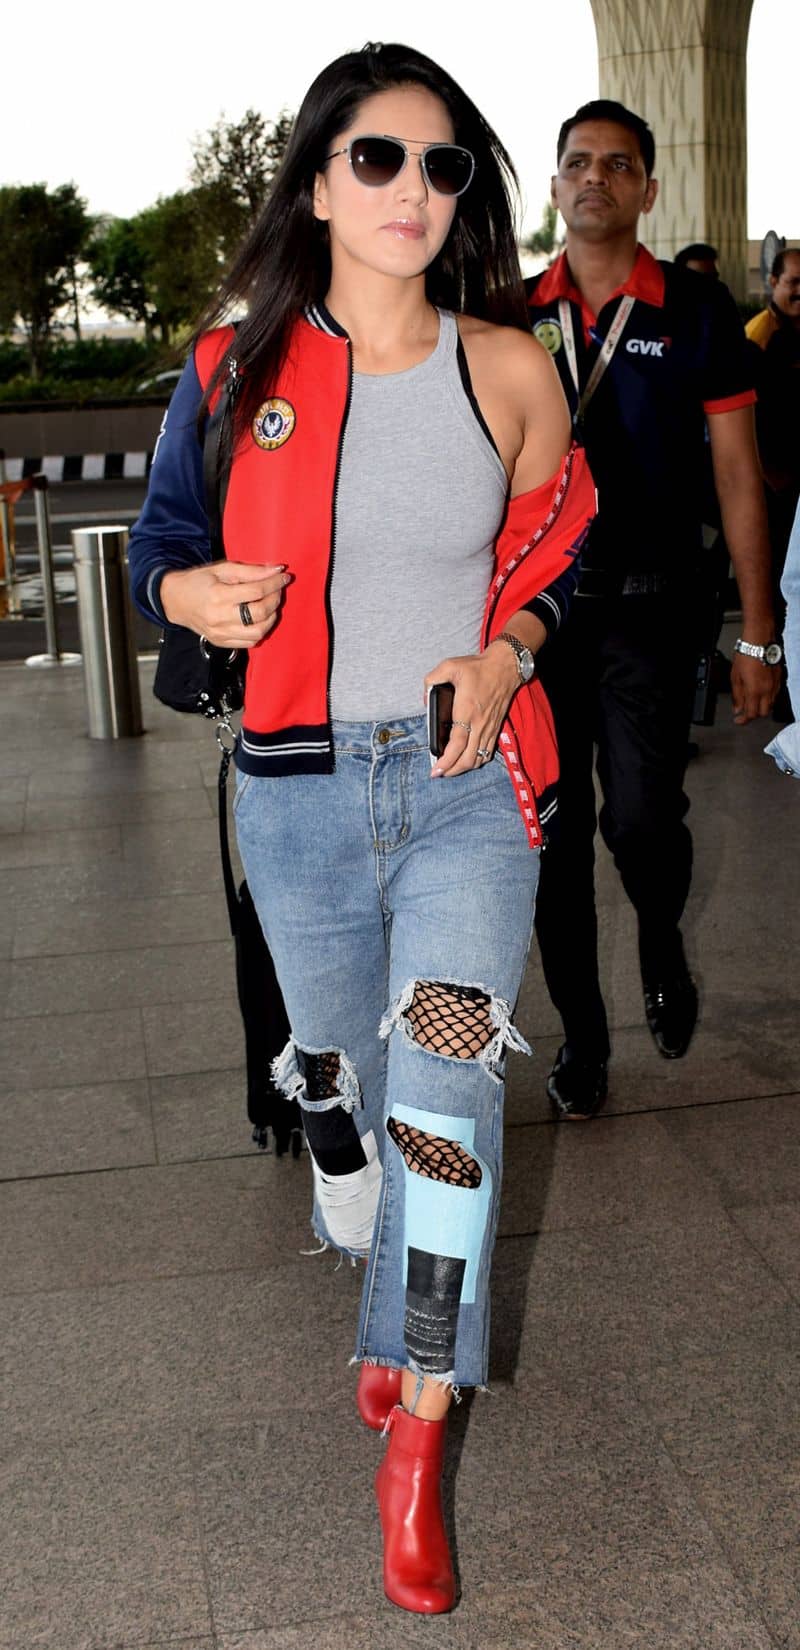 15 celebrity airport looks to inspire your winter fashion and beat the cold